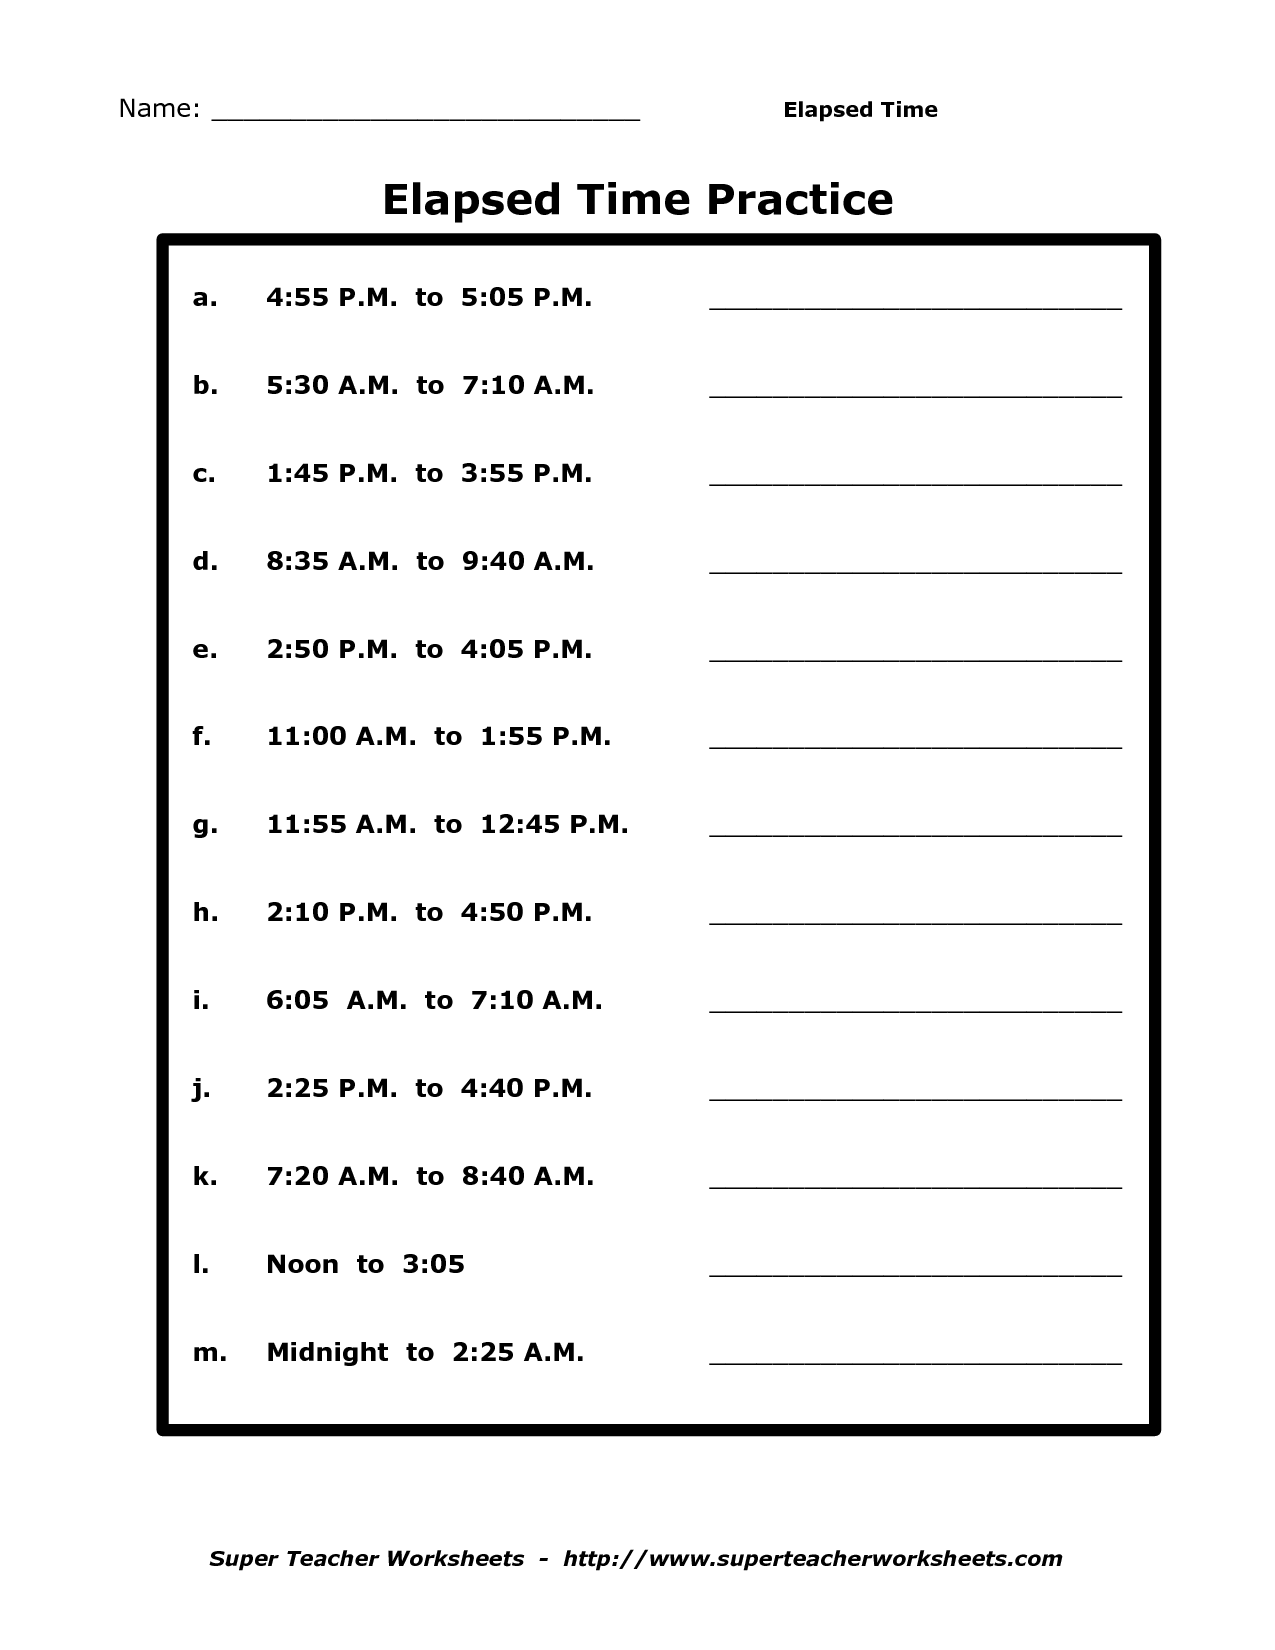 Practice Elapsed Time Worksheets